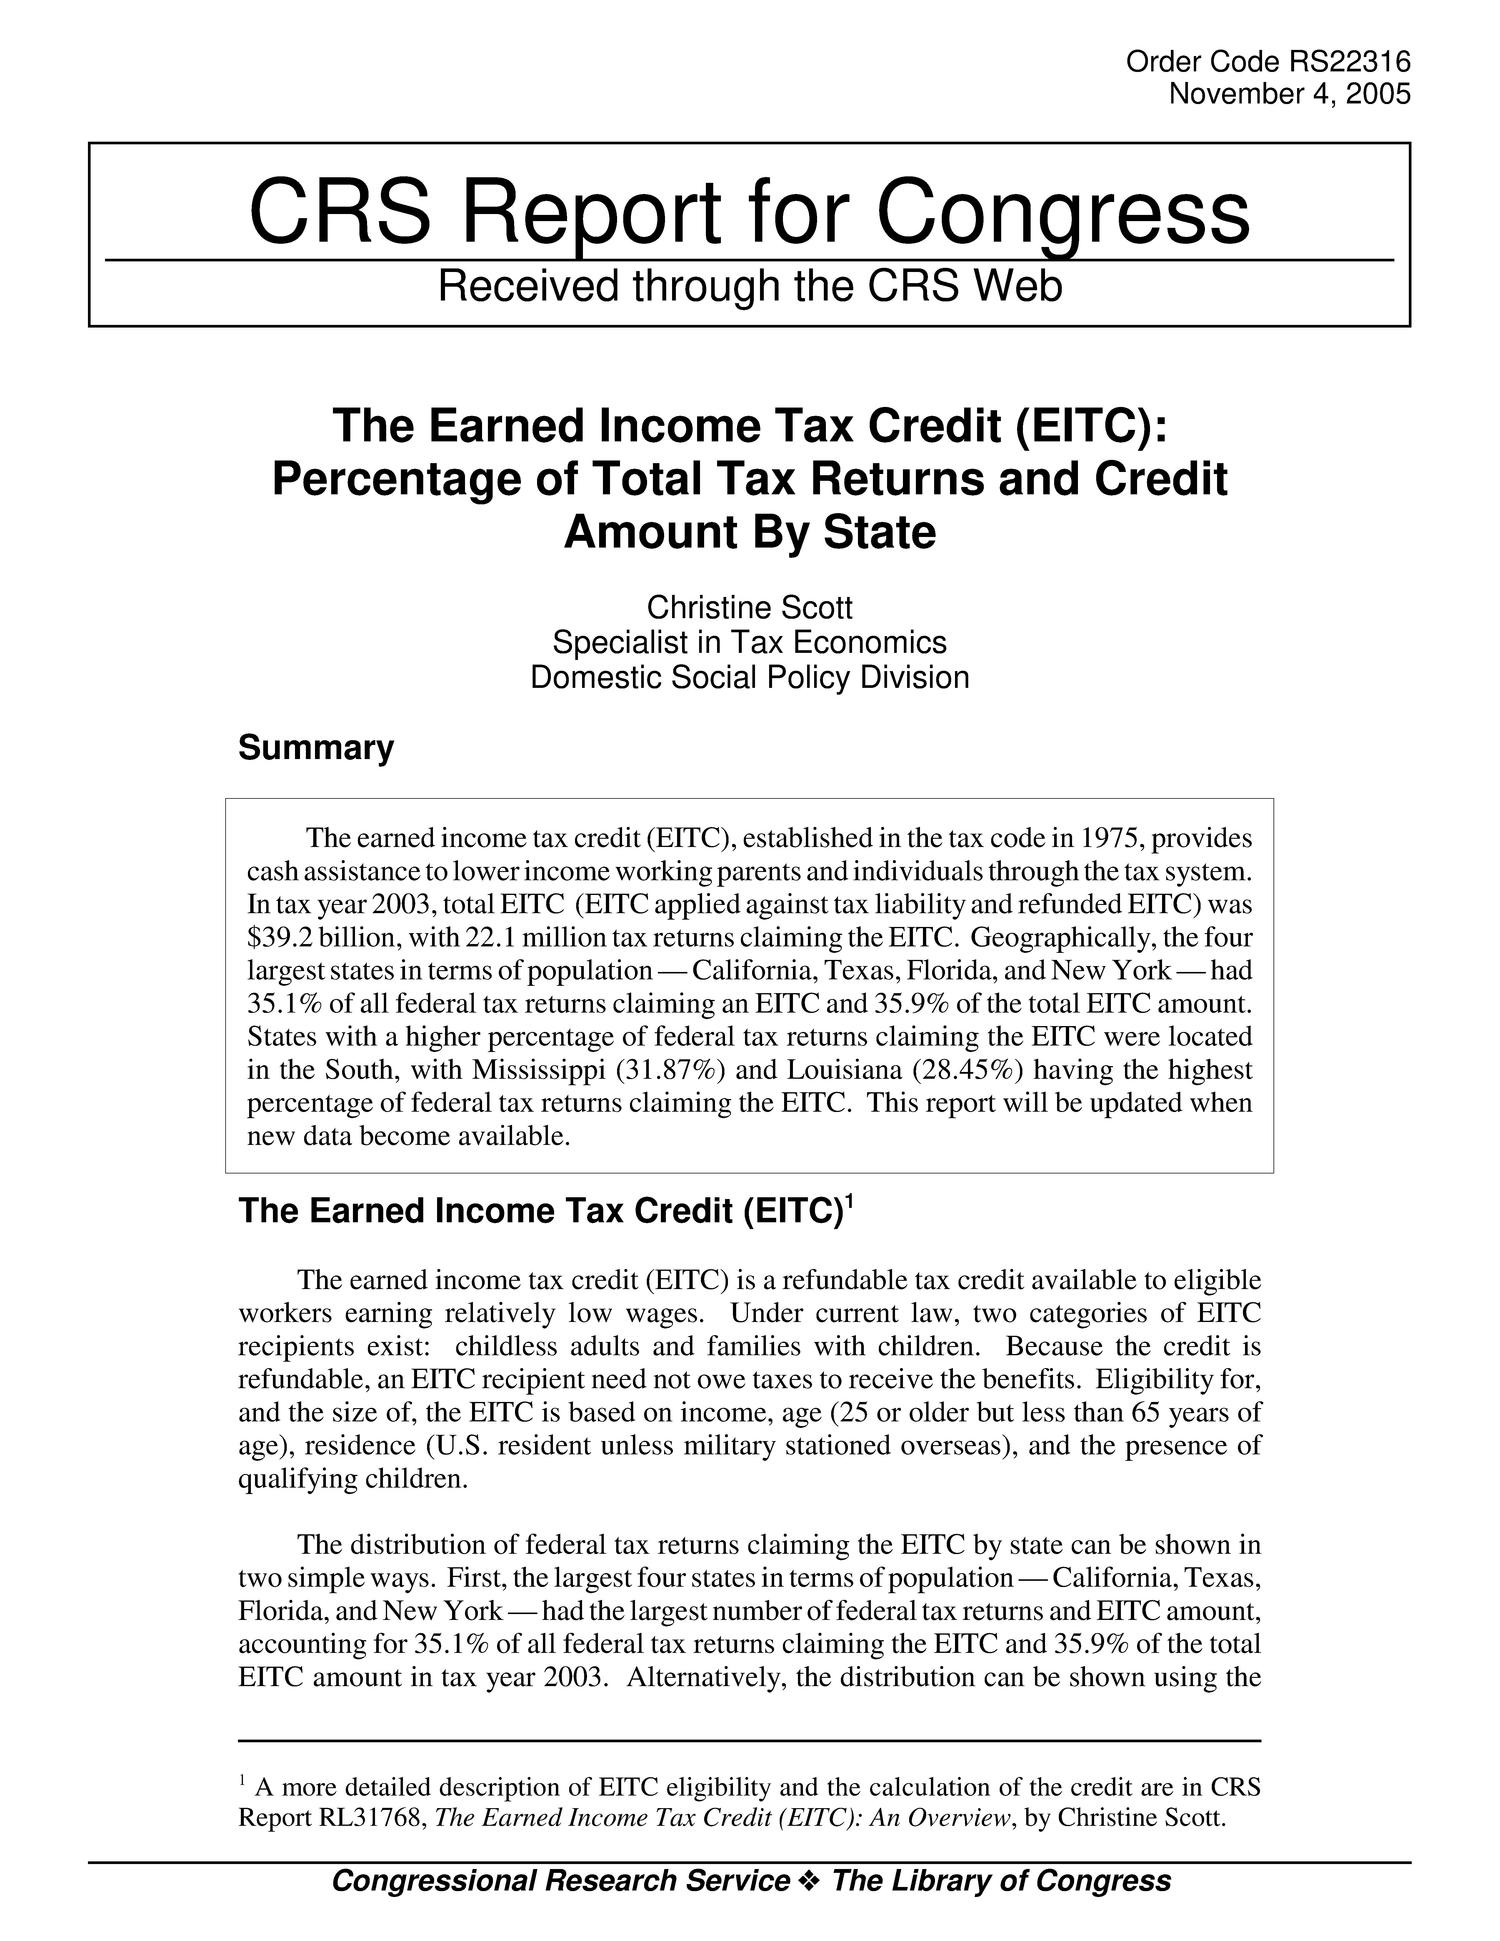 The Earned Income Tax Credit (EITC): Percentage of Total Tax Returns and Credit Amount by State
                                                
                                                    [Sequence #]: 1 of 5
                                                